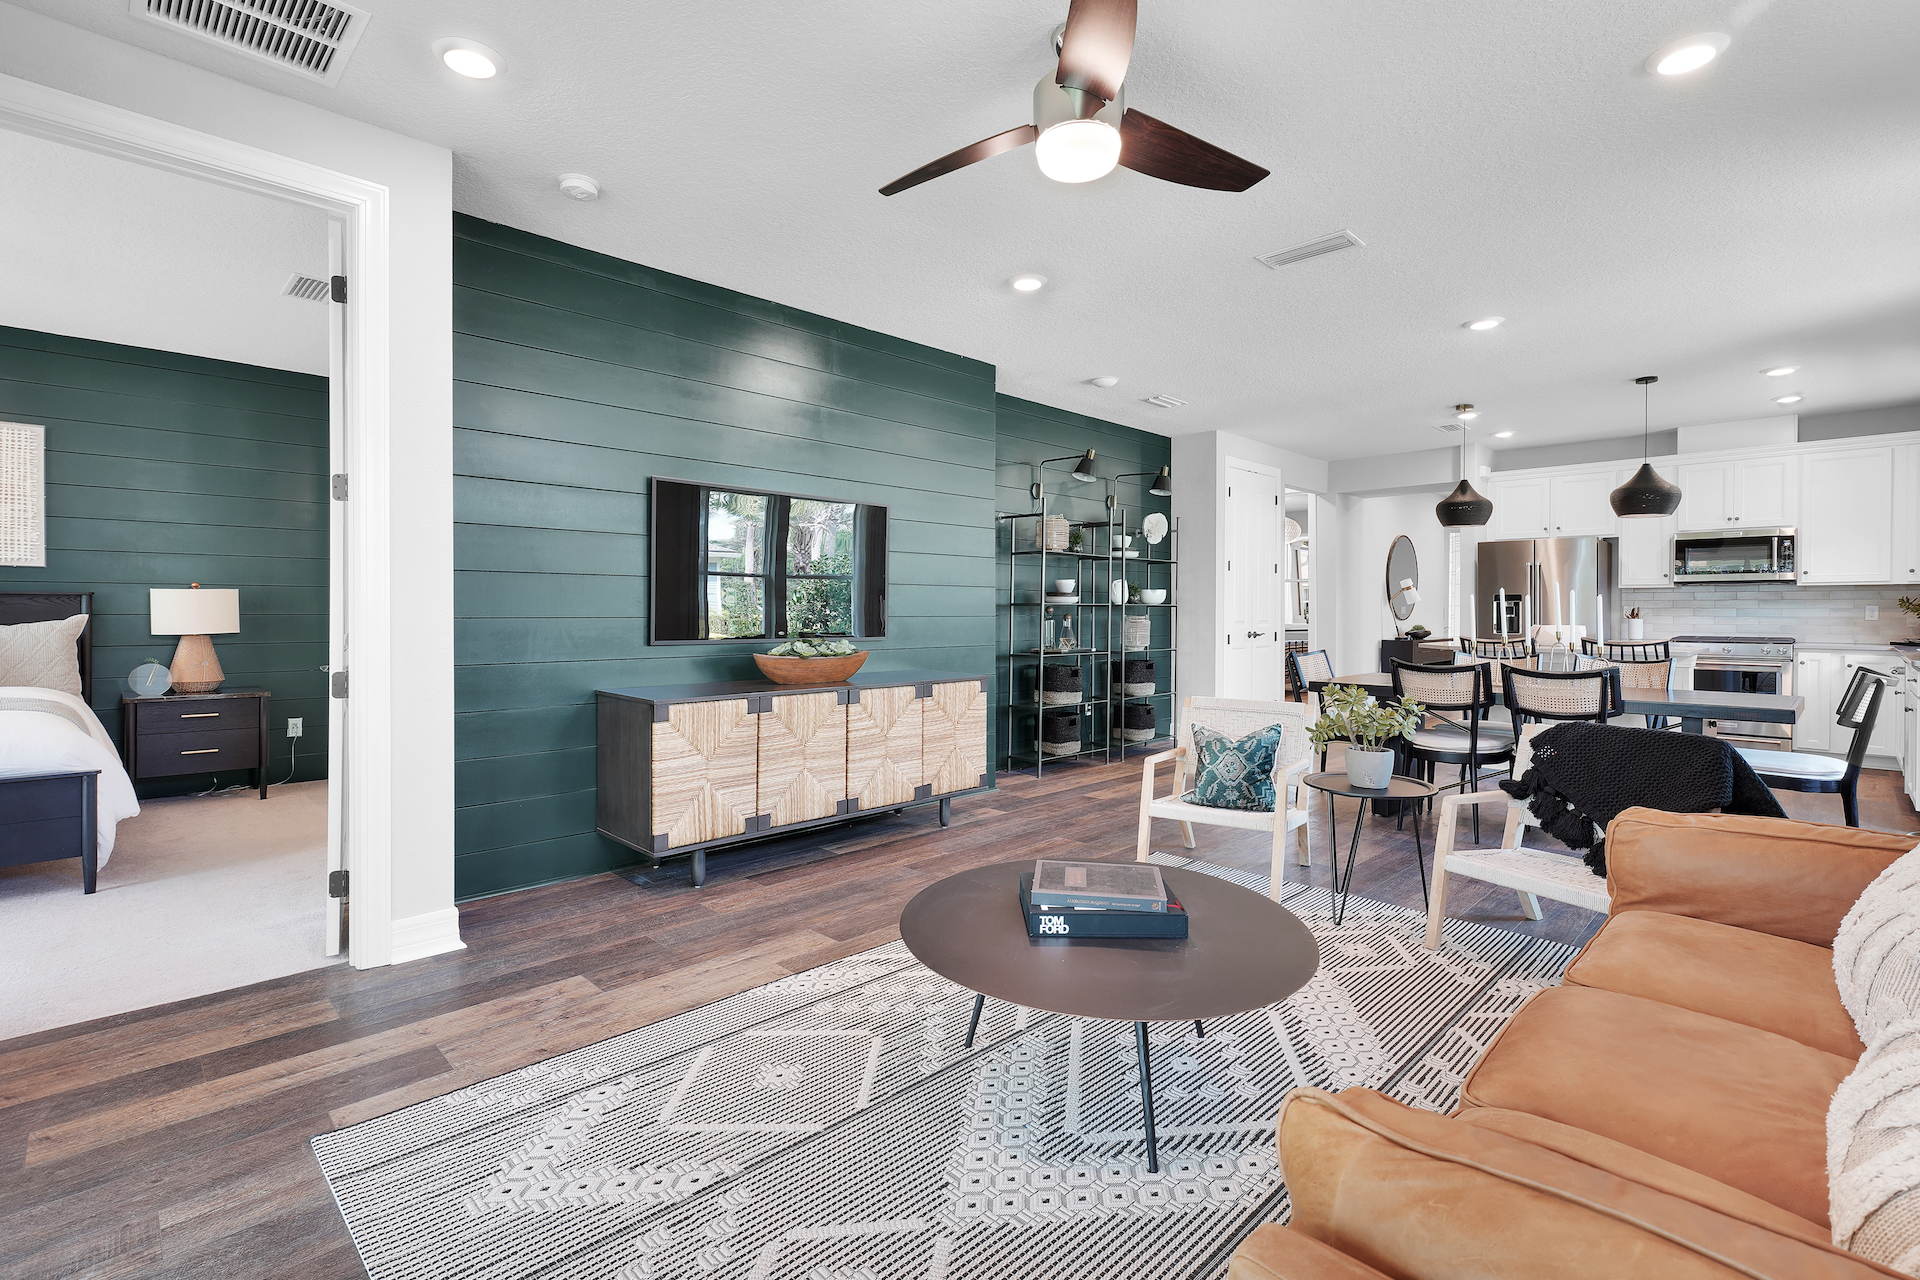 Del Webb Wildlight open concept white kitchen and living room with green shiplap accent wall.